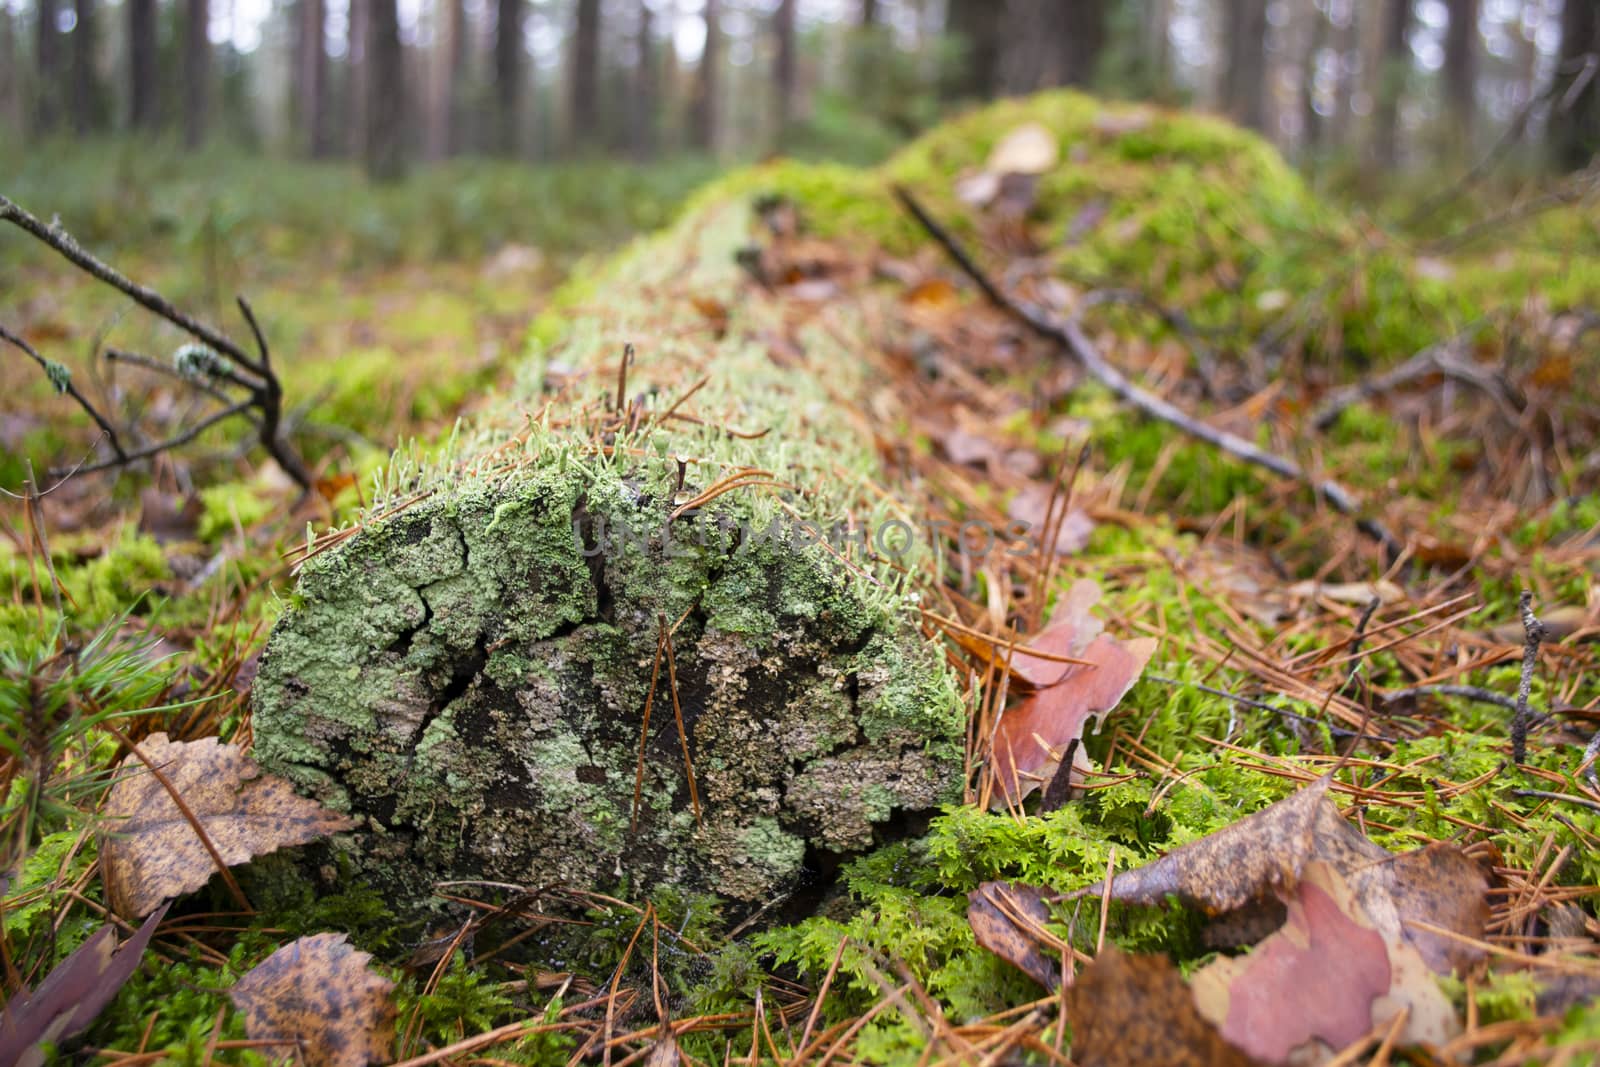 Moss on a dead log tree in wild forest. Moss ecosystem in natural habitat in forest. Close up